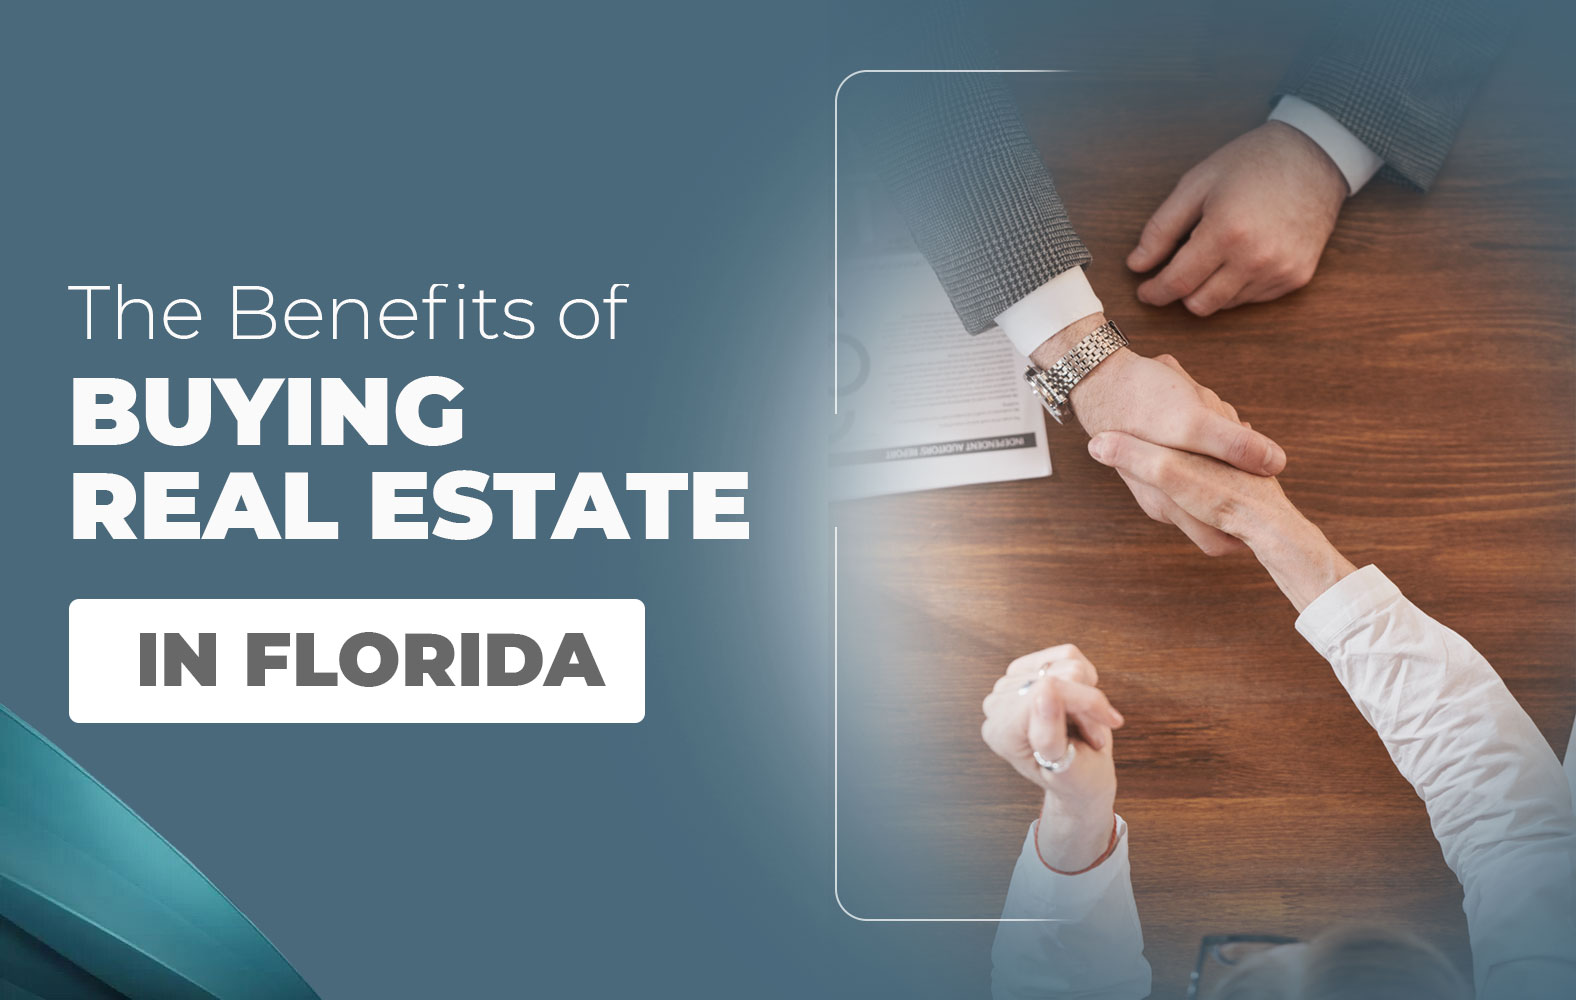 The benefits of buying real estate in Florida